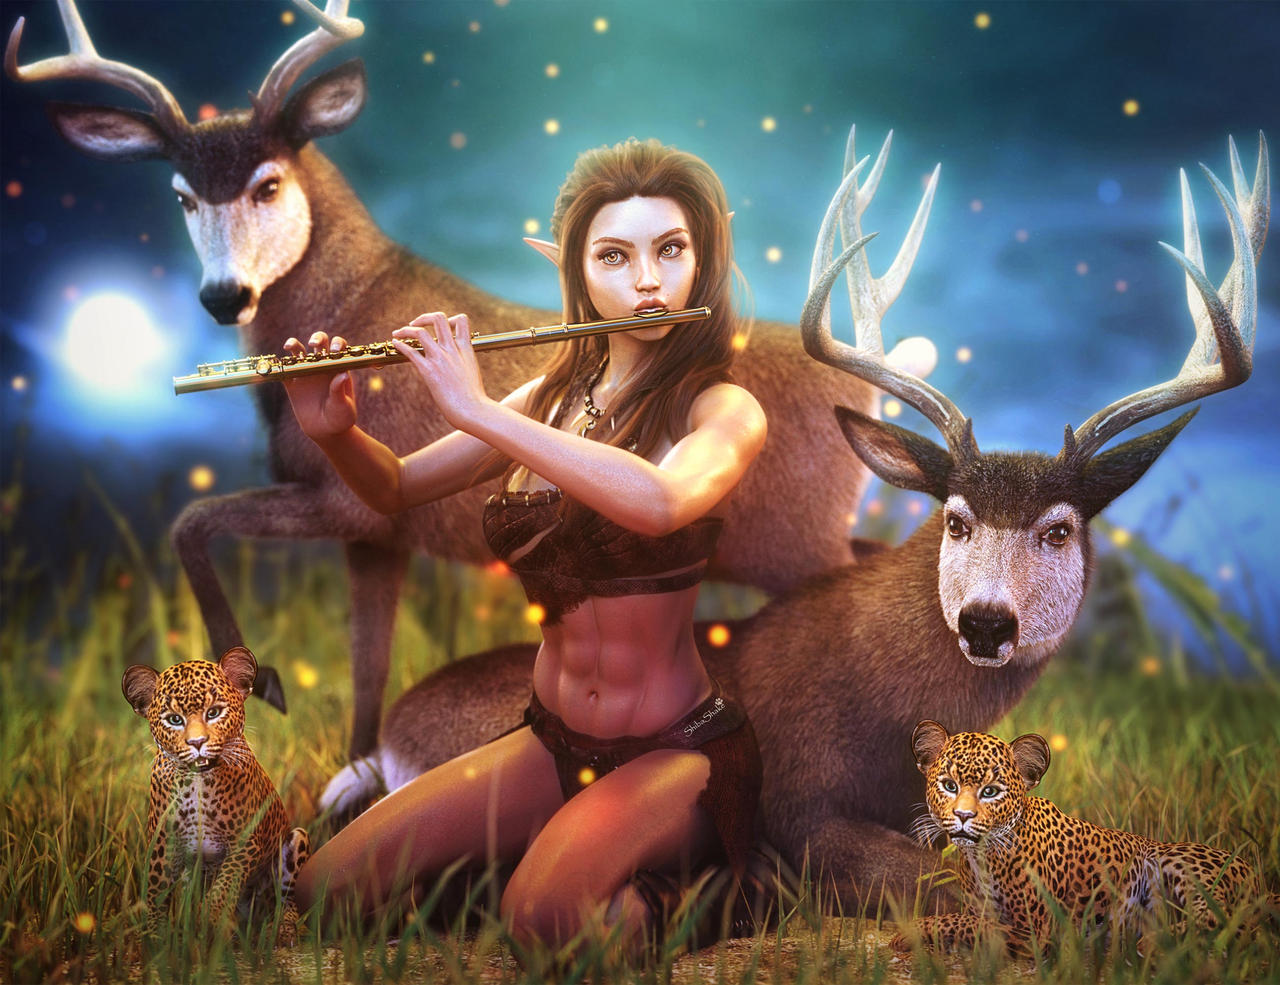 Fantasy elf girl playing the flute, surrounded by deer, leopard cubs, and other animals. Fantasy woman art. Daz Studio Iray image.